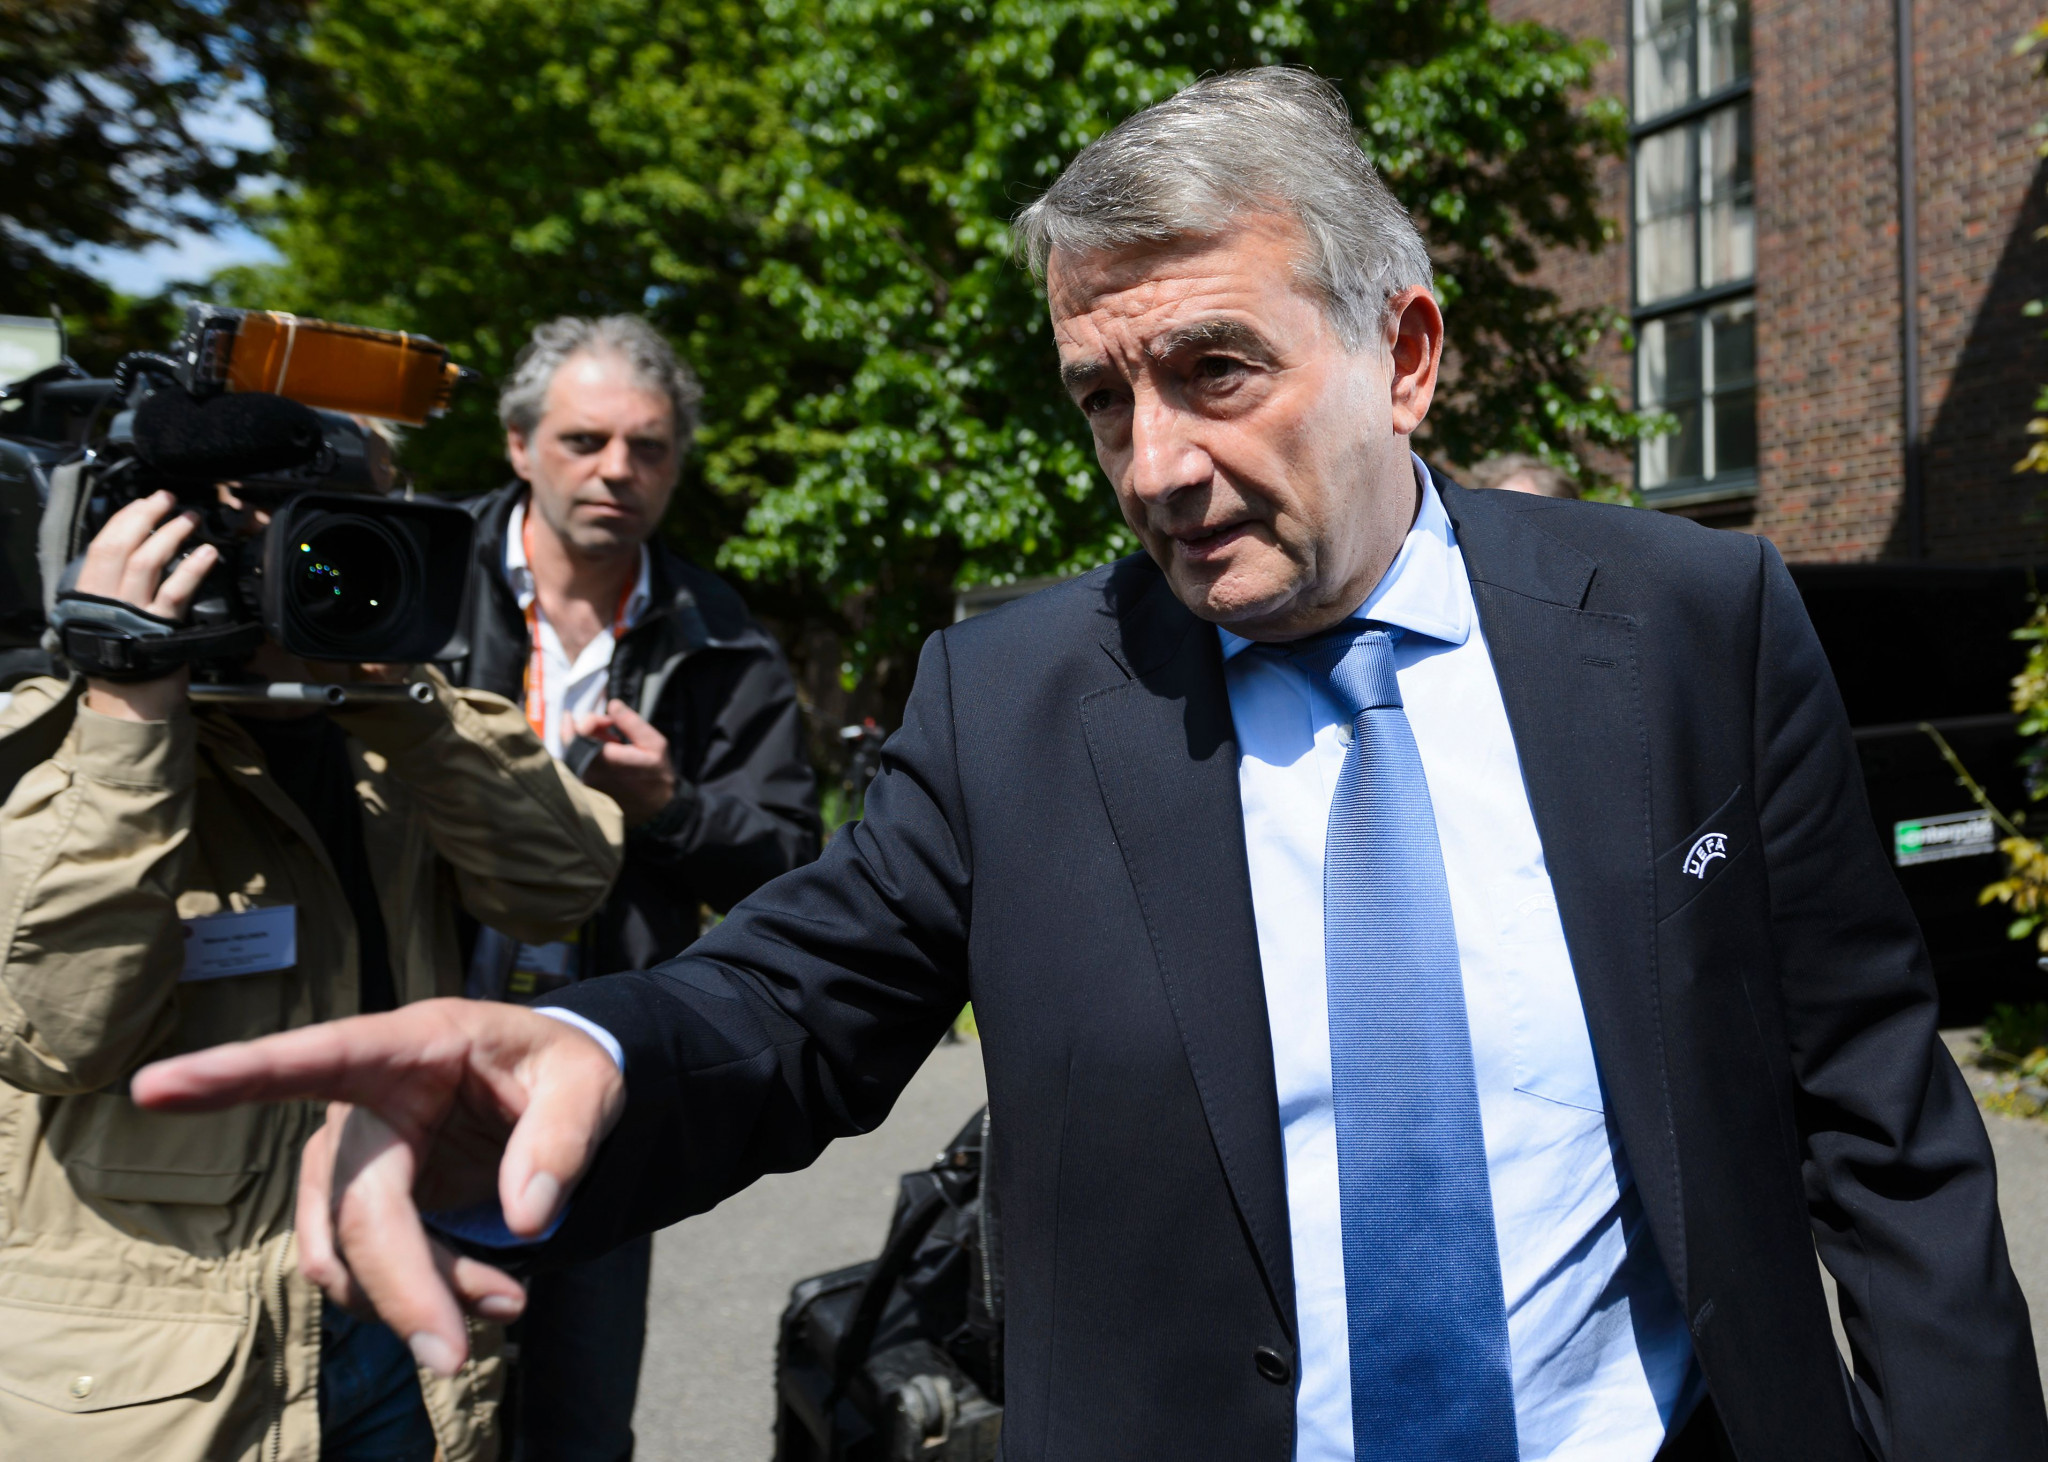 Wolfgang Niersbach, pictured, succeeded Theo Zwanziger as German Football Association President and both have now been cleared of tax evasion charges ©Getty Images